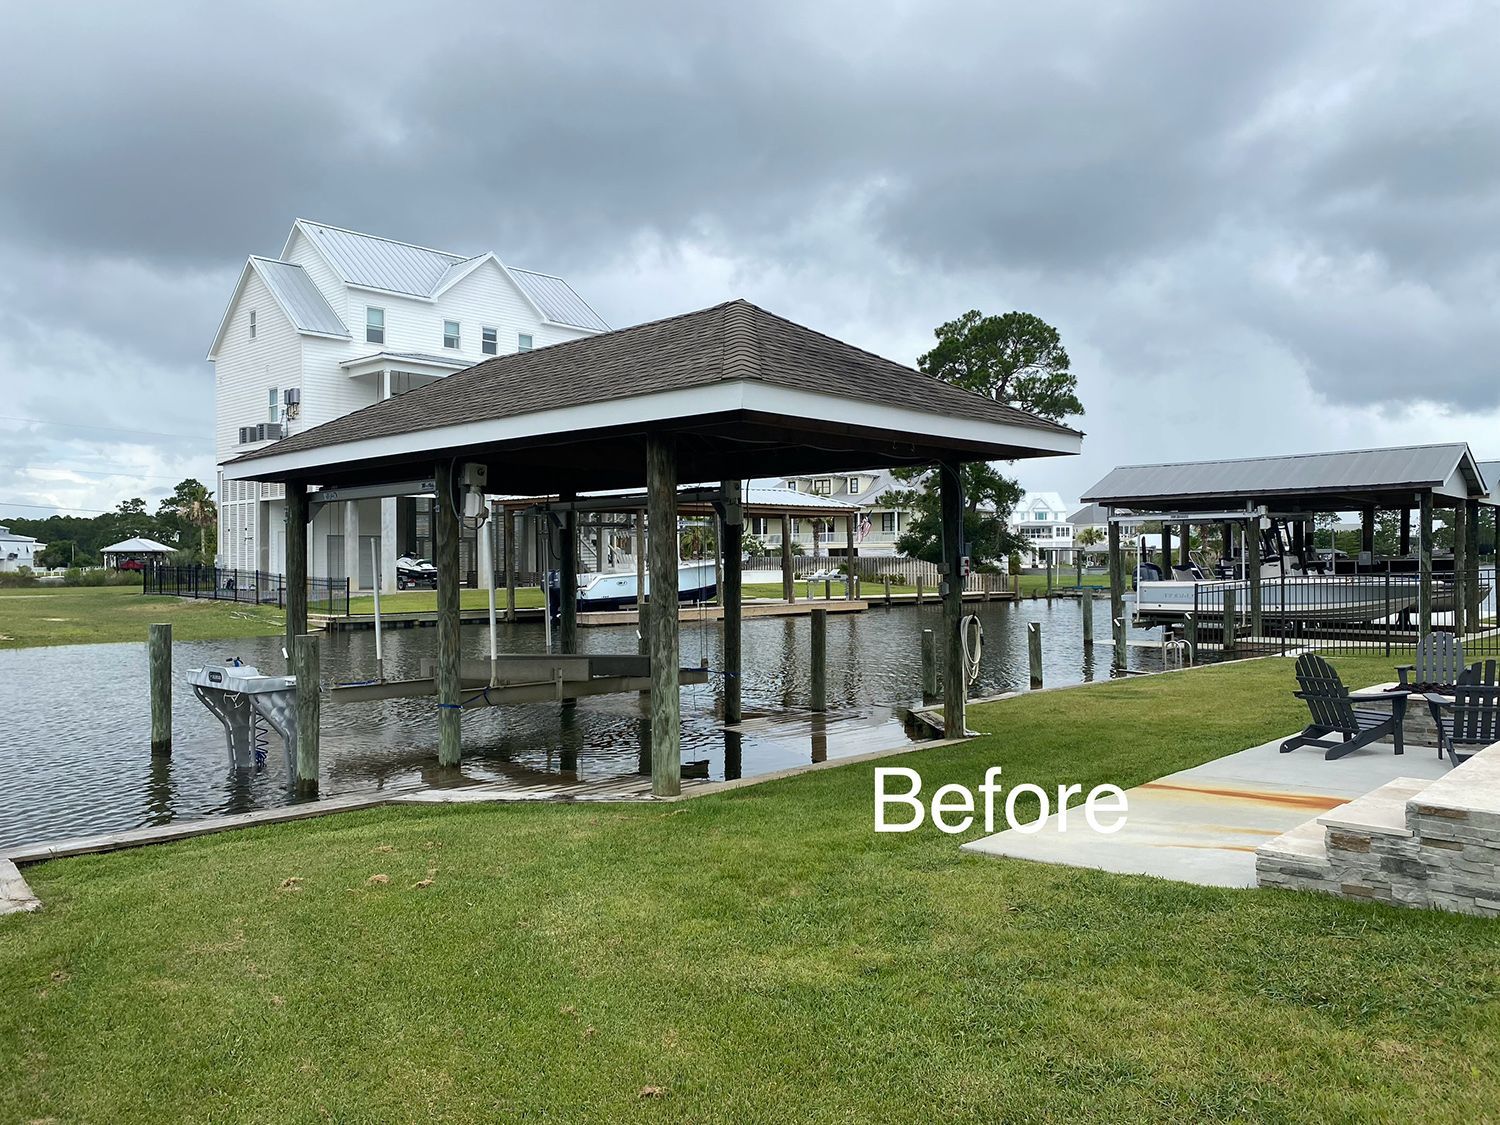 A before picture of a boat dock with a house in the background